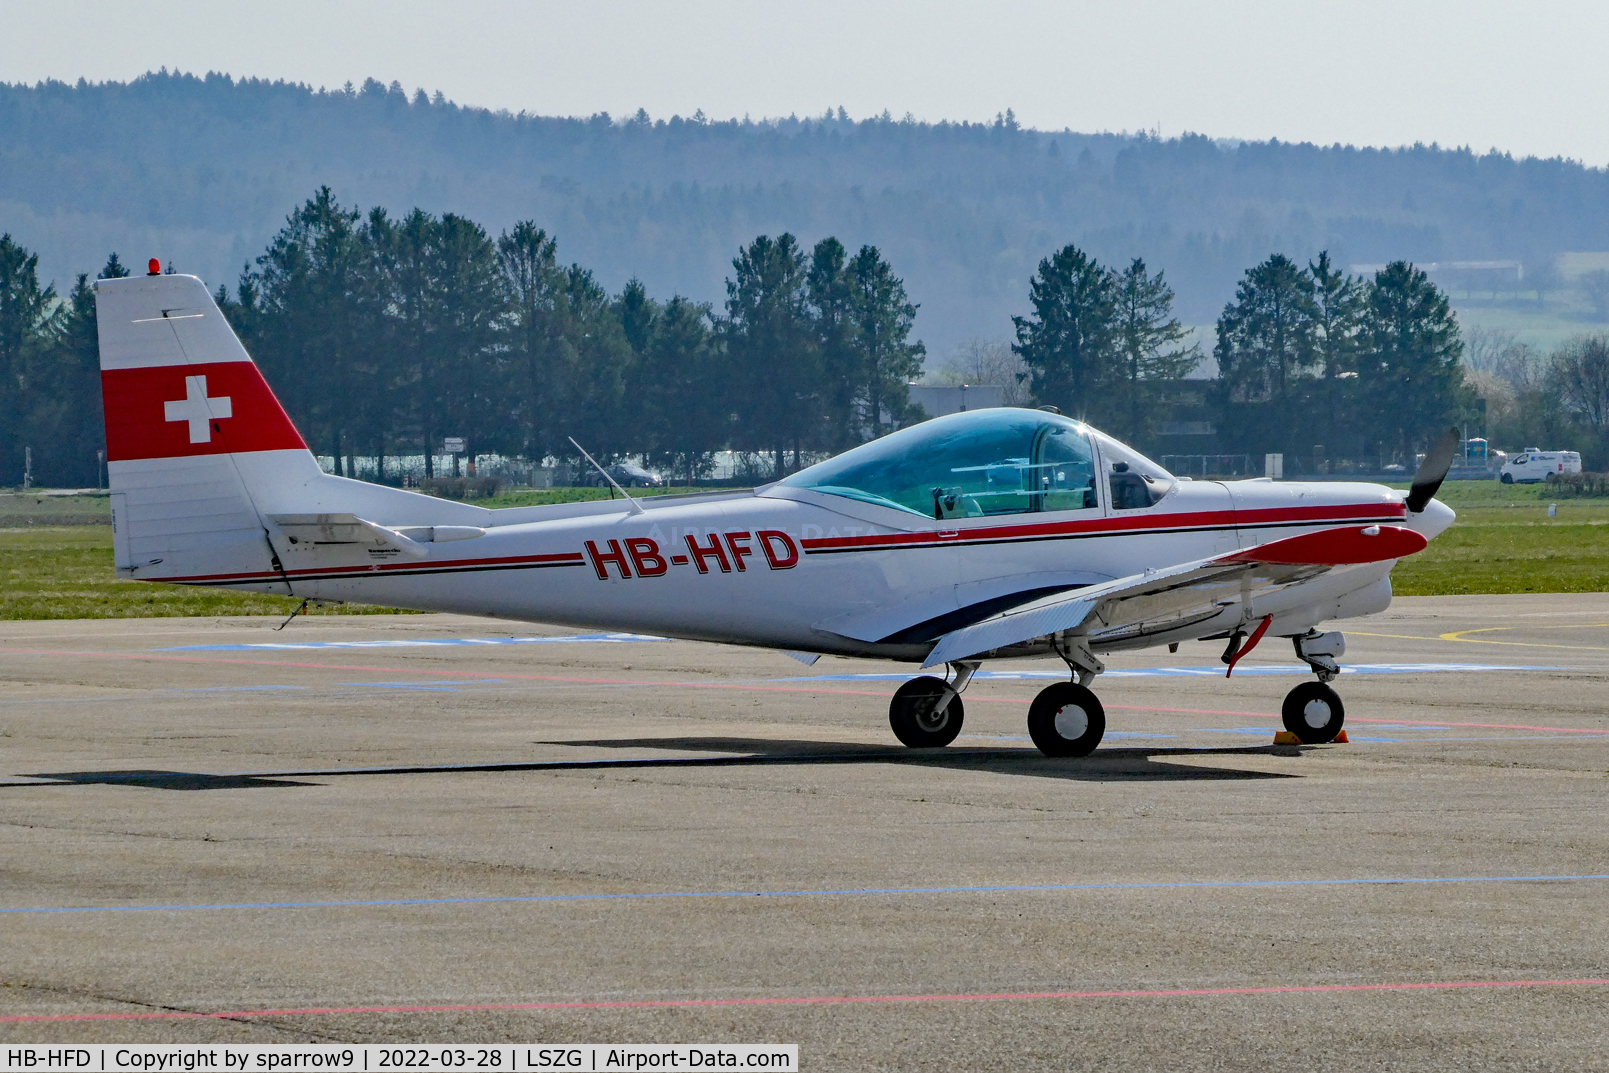 HB-HFD, 1976 FFA AS-202/18A-1 Bravo C/N 023, Parked at Grenchen